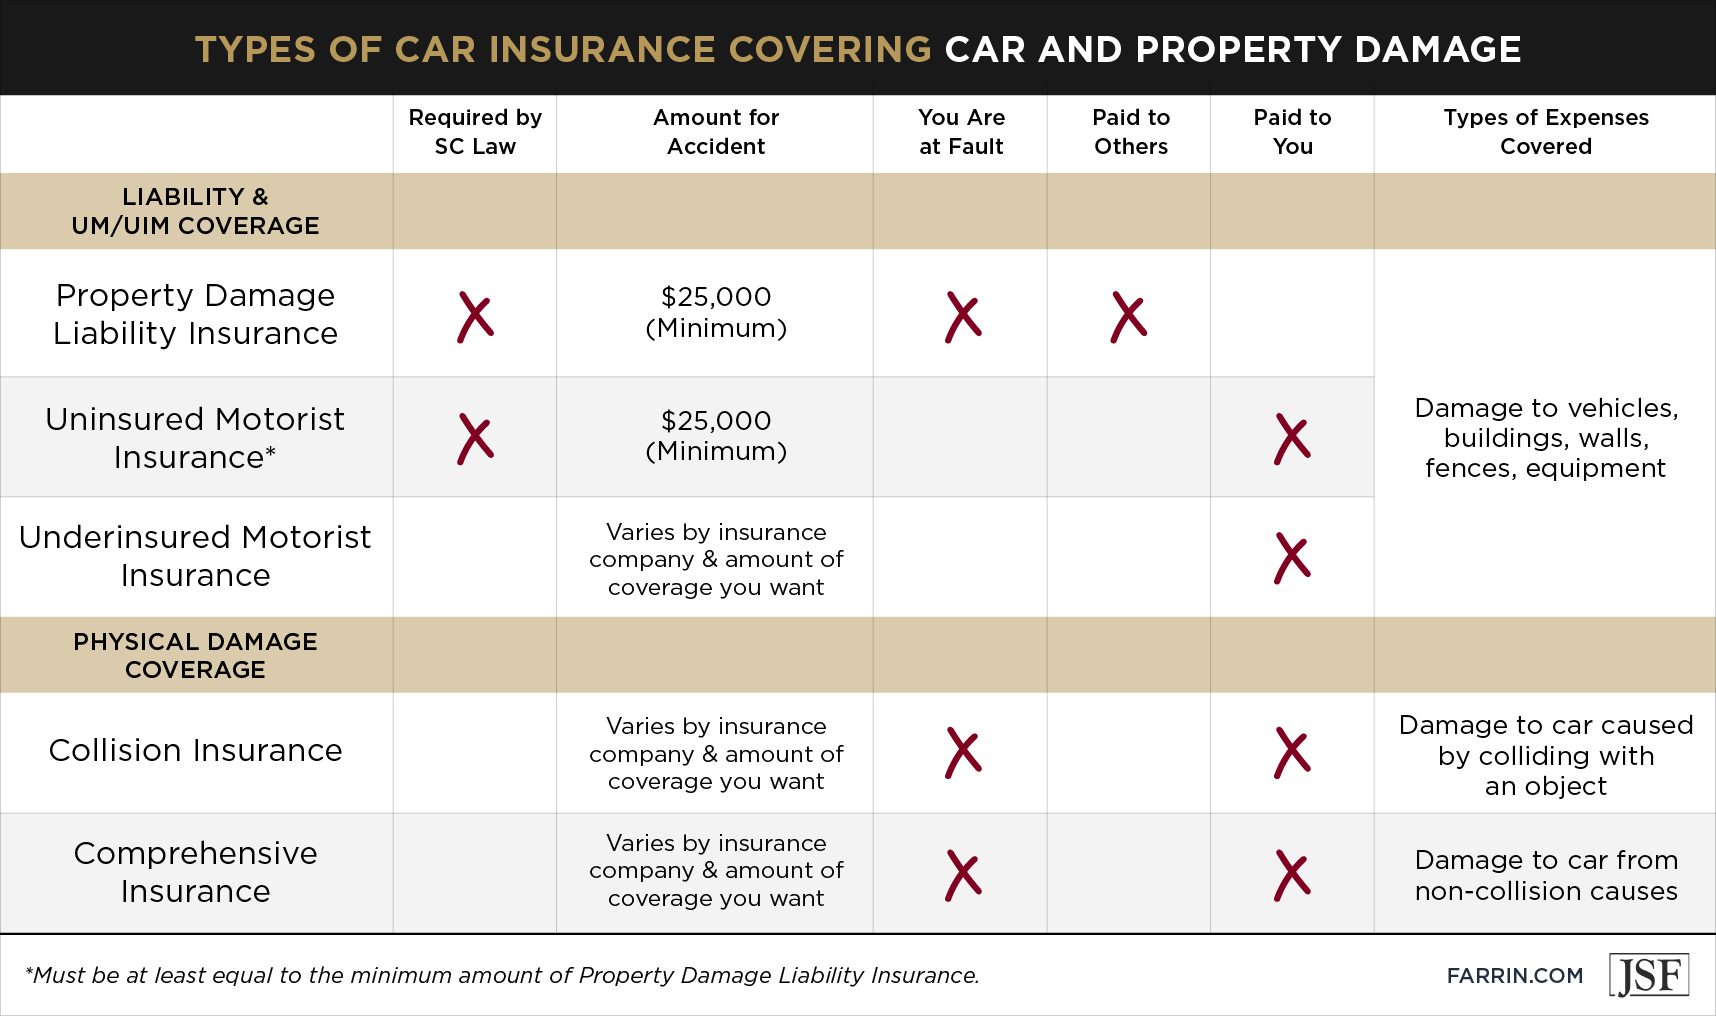 Types of car insurance covering personal injury expenses, including liability and medical coverage.